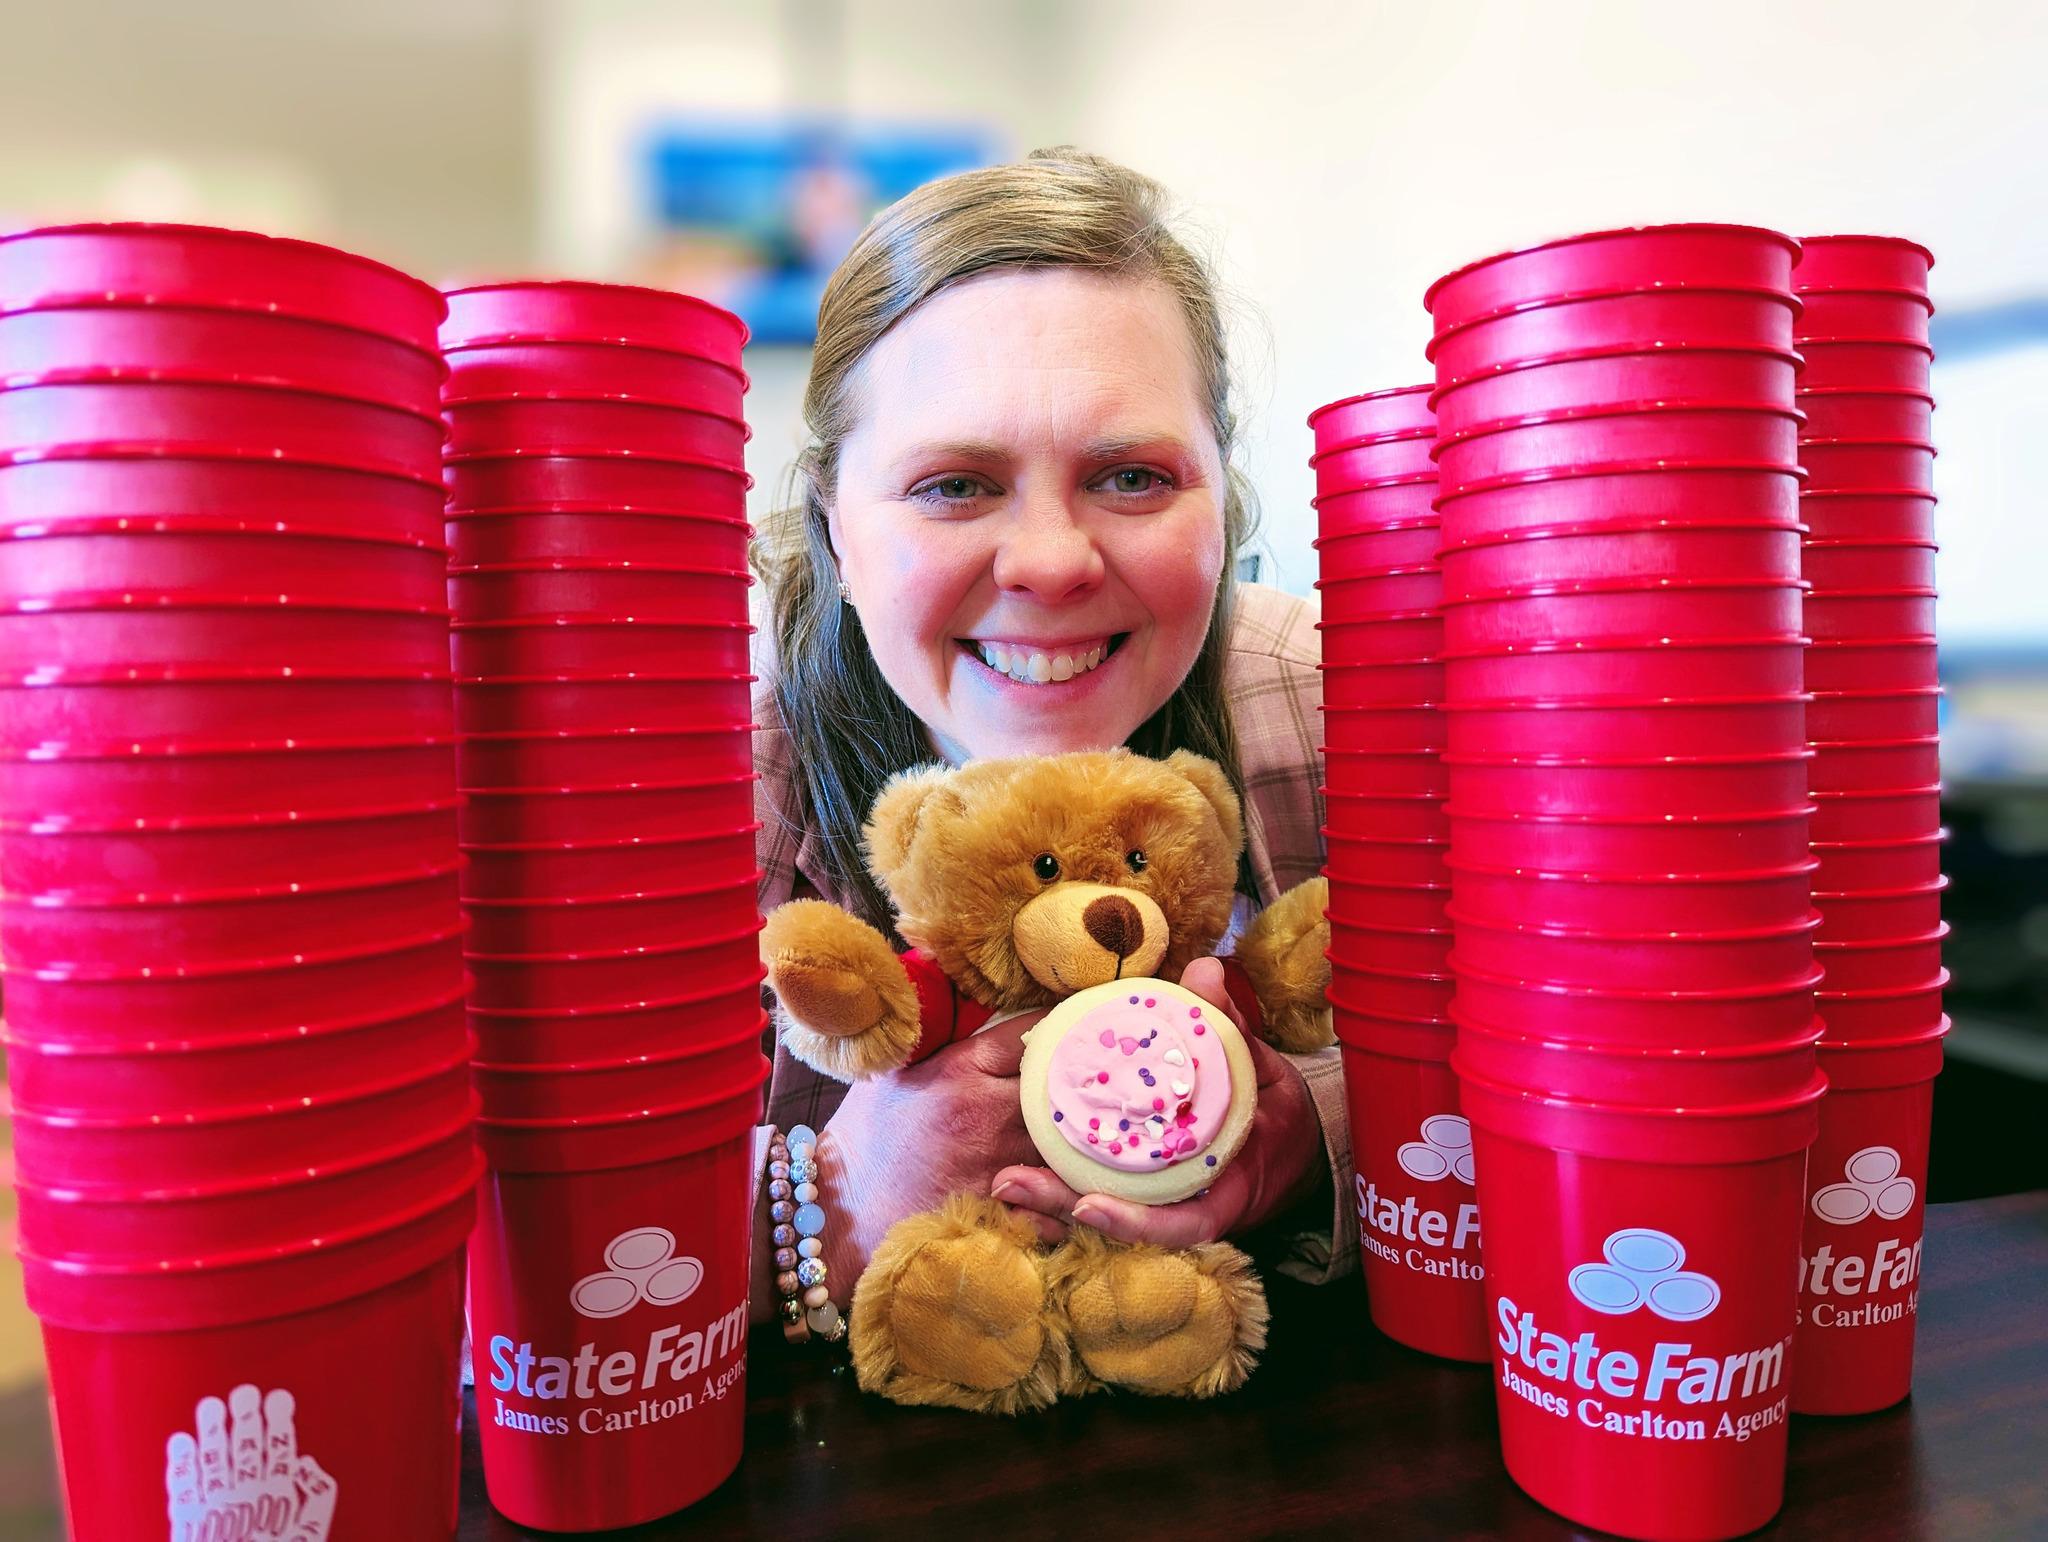 Happy Valentine's Day!  Our cup is overflowing with love for you.  Love, your friends at James Carlton State Farm.